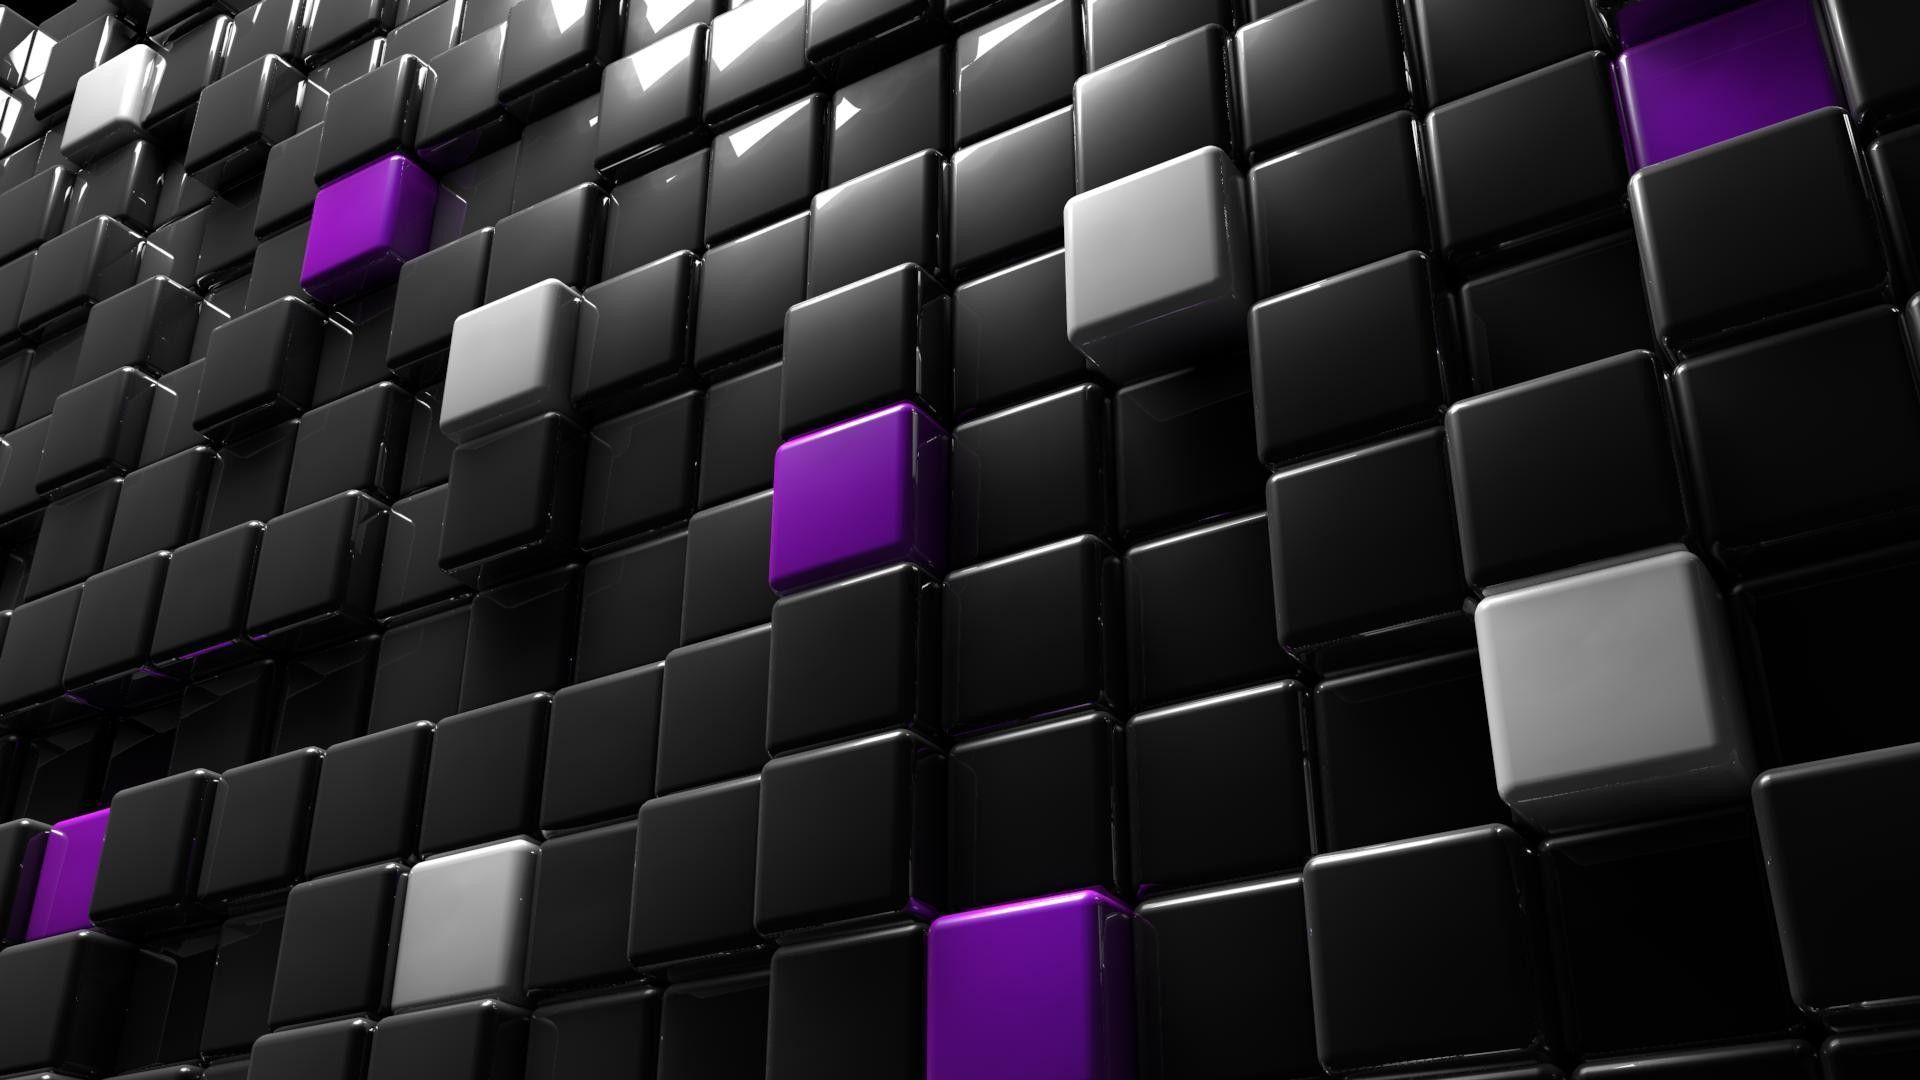 Abstract Cube Wallpaper Free Abstract Cube Background